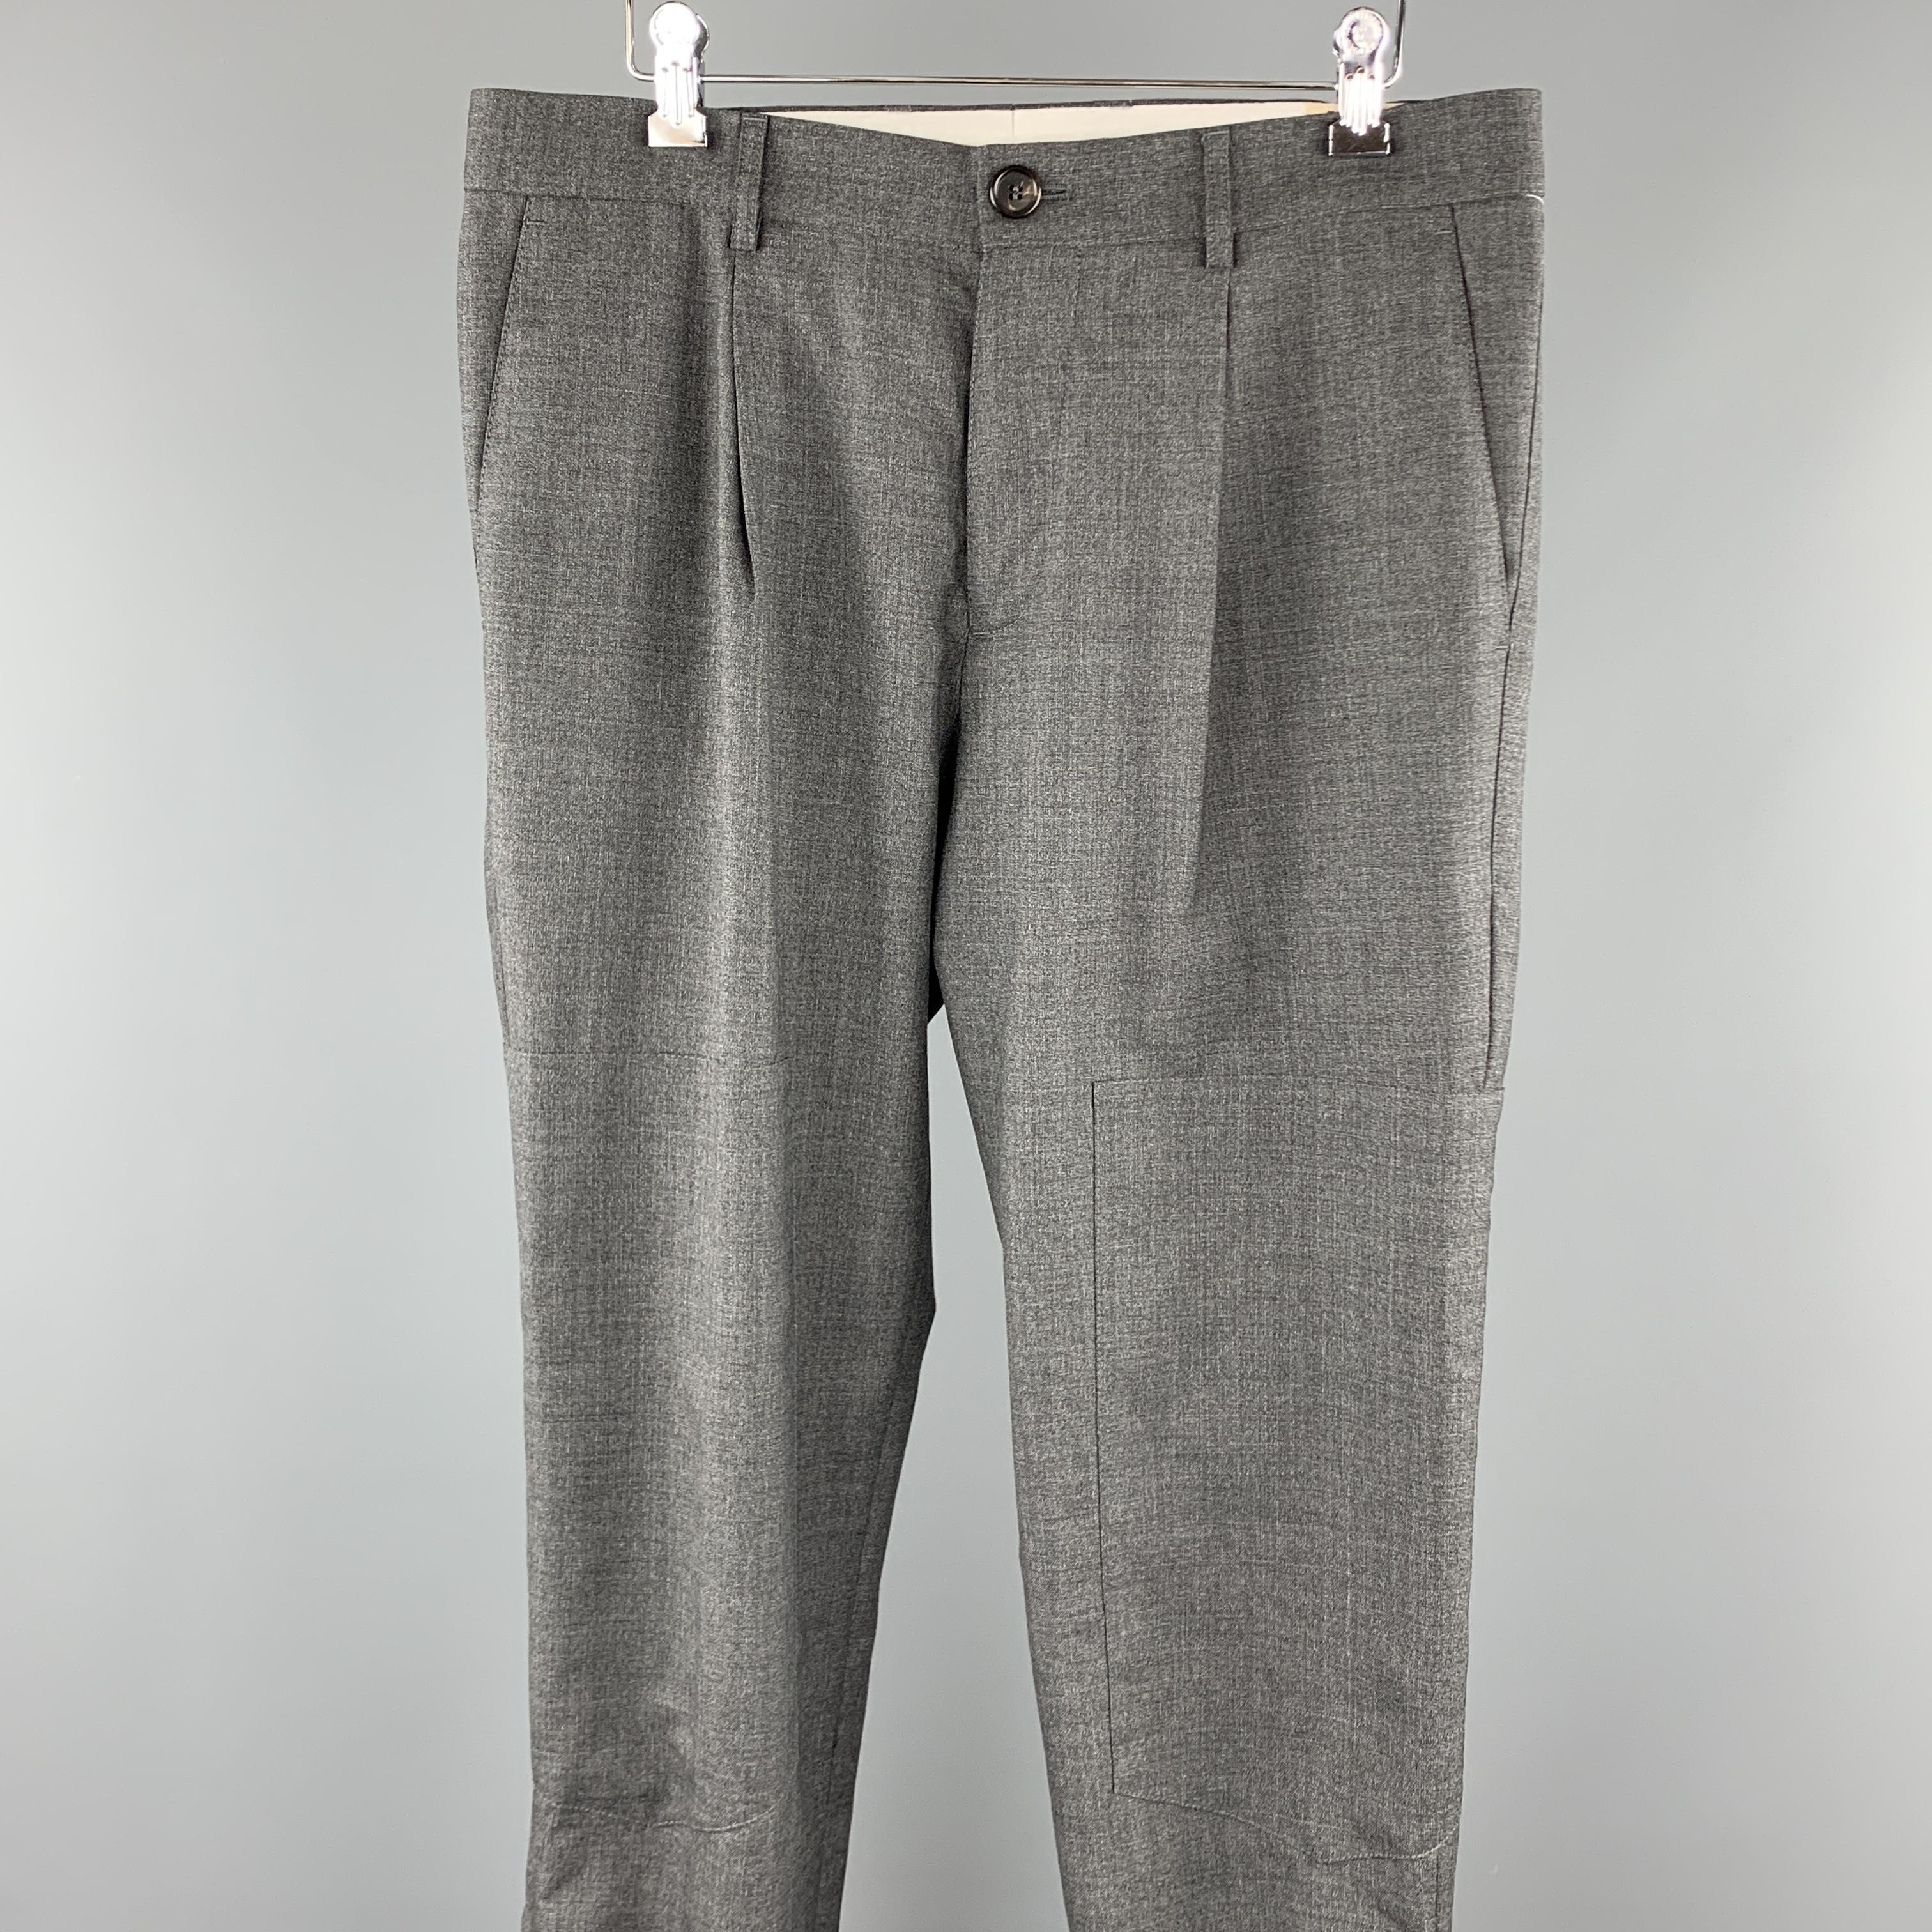 BRUNELLO CUCINELLI dress pants comes in a dark gray wool featuring a single pleat style, knee panels, elastic cuffs & zipper, and a zip fly closure. Made in Italy. 

Excellent Pre-Owned Condition.
Marked: IT 48

Measurements:

Waist: 34 in. 
Rise: